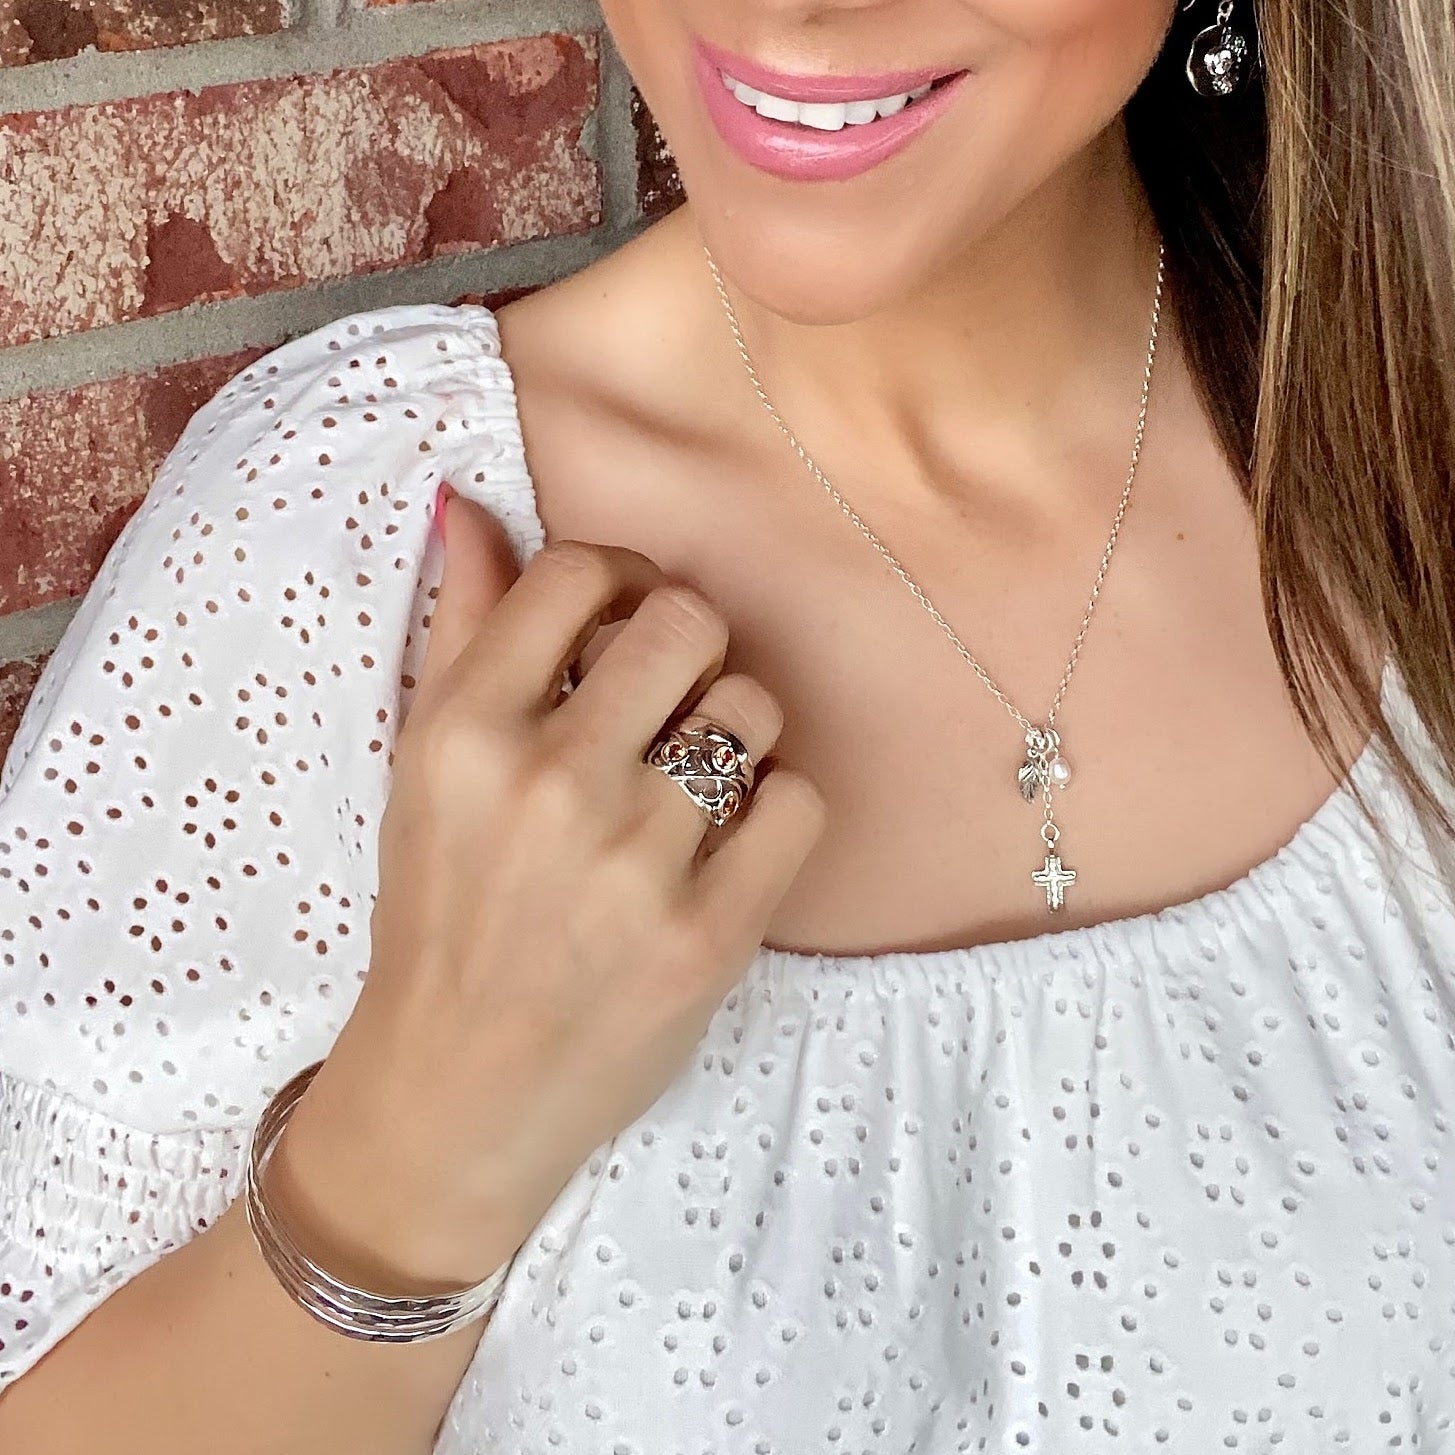 Sunlit Tide Ring paired with Better Half Earrings, New Life Necklace, and Off the Cuff Bangle